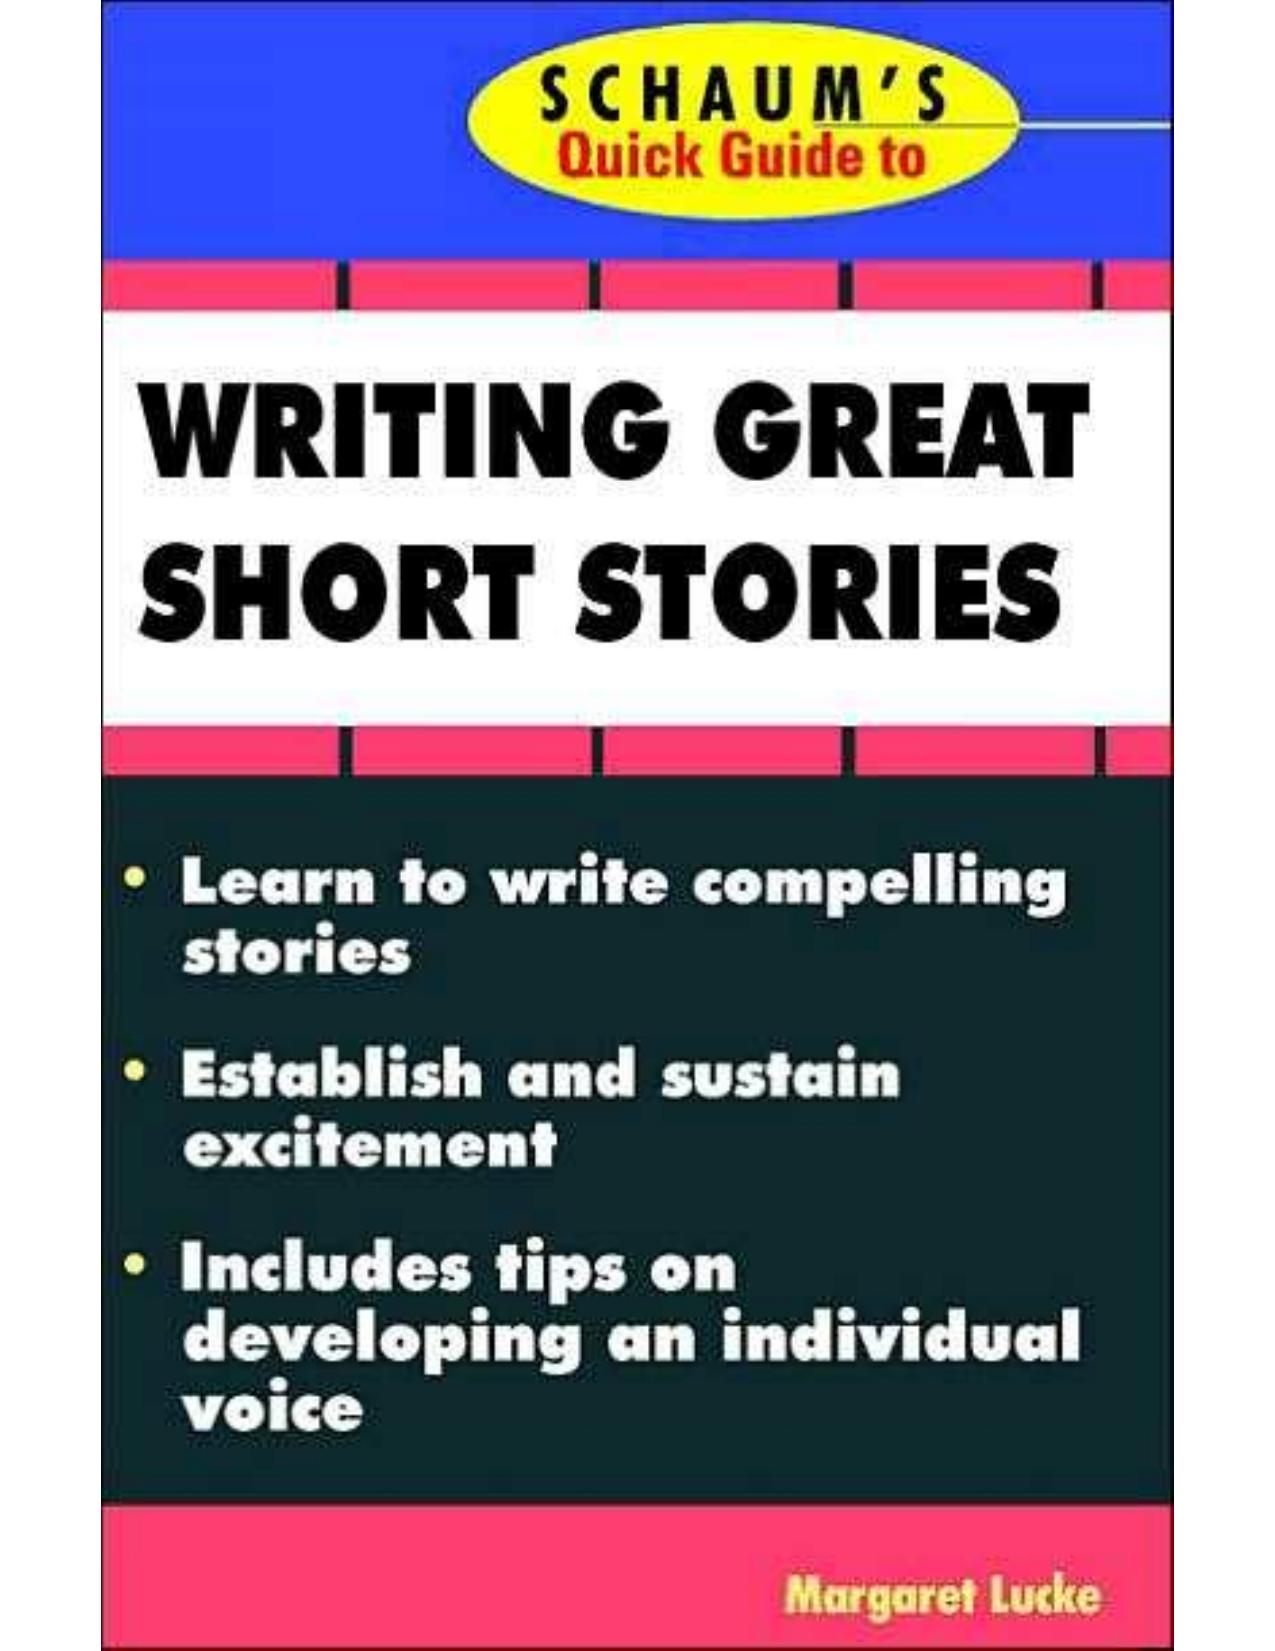 Schaum's Quick Guide to Writing Great Short Stories by Margaret Lucke